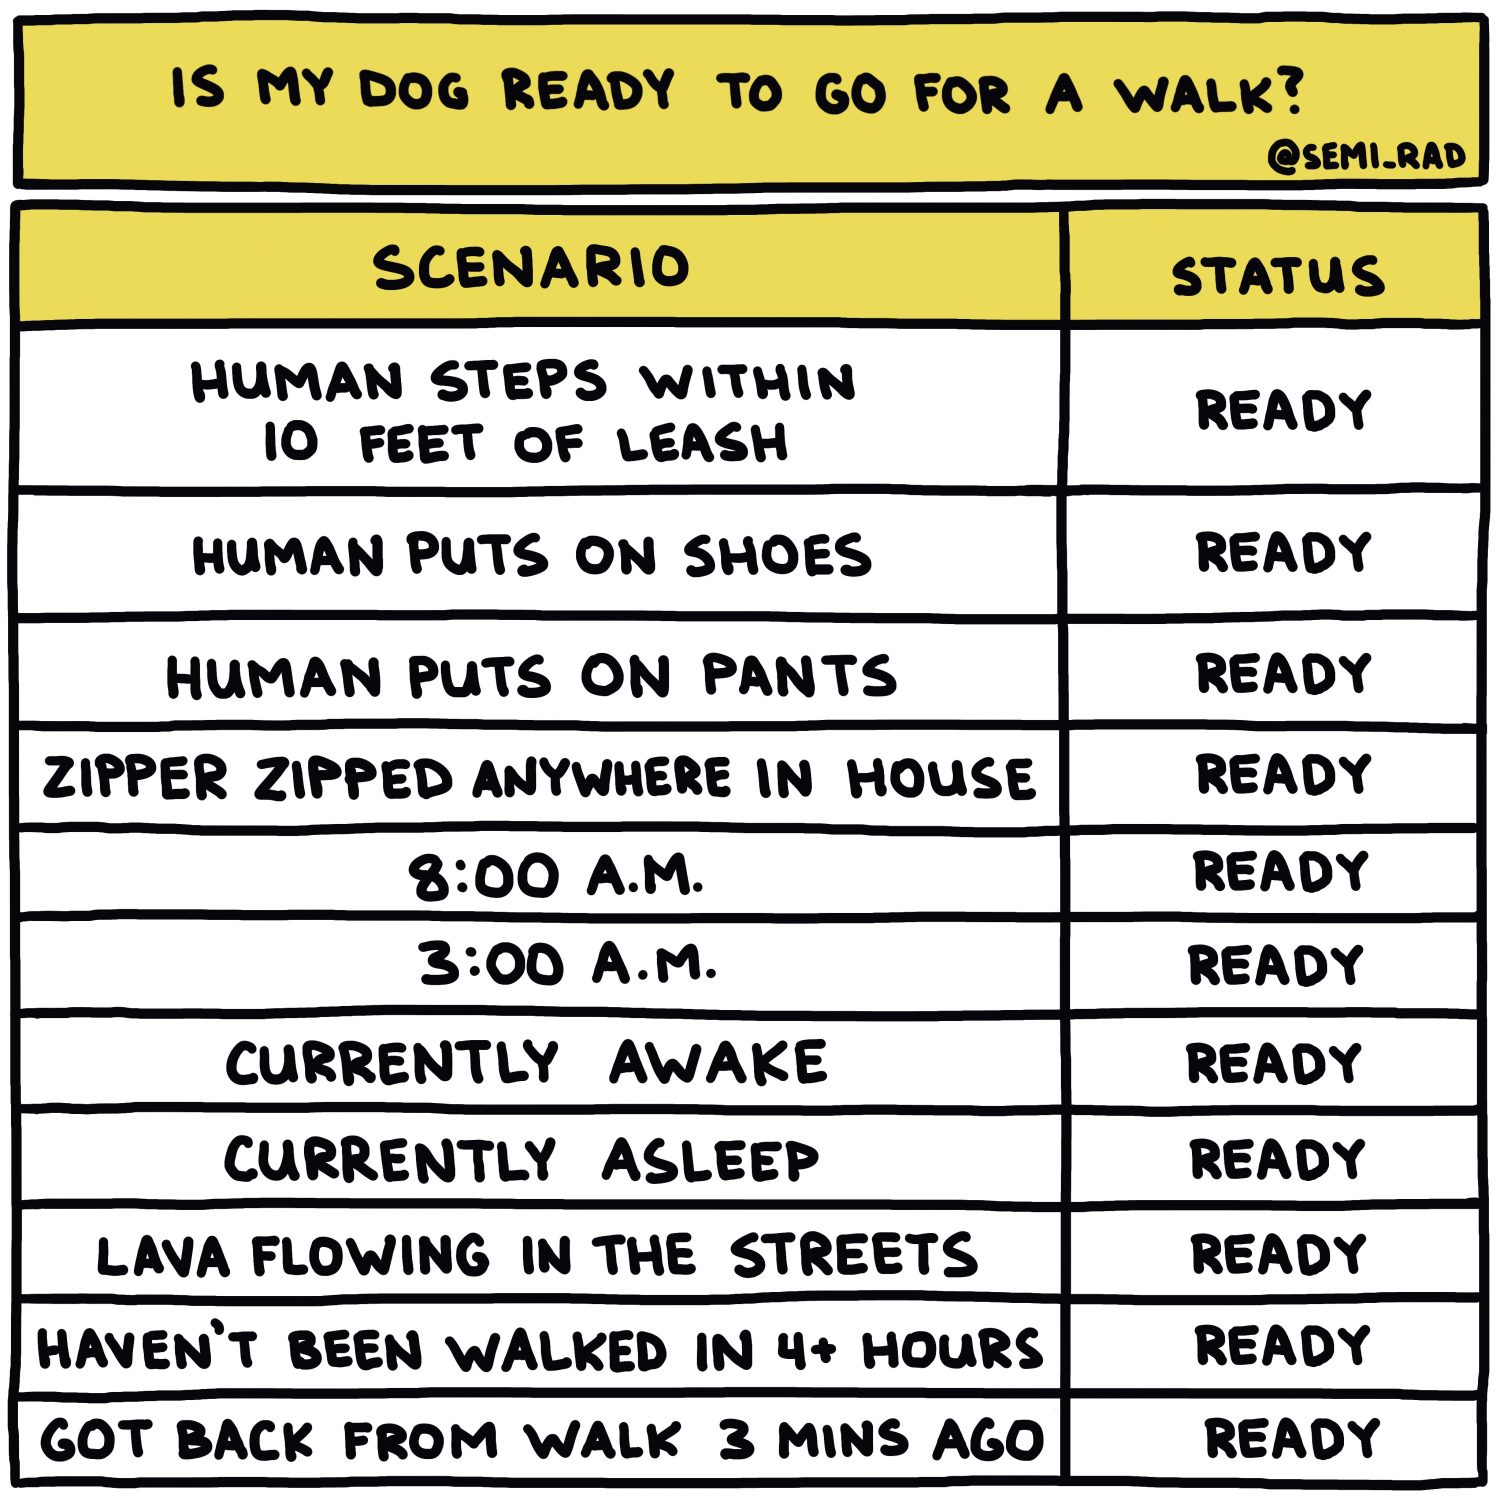 semi-rad chart: is my dog ready to go for a walk?